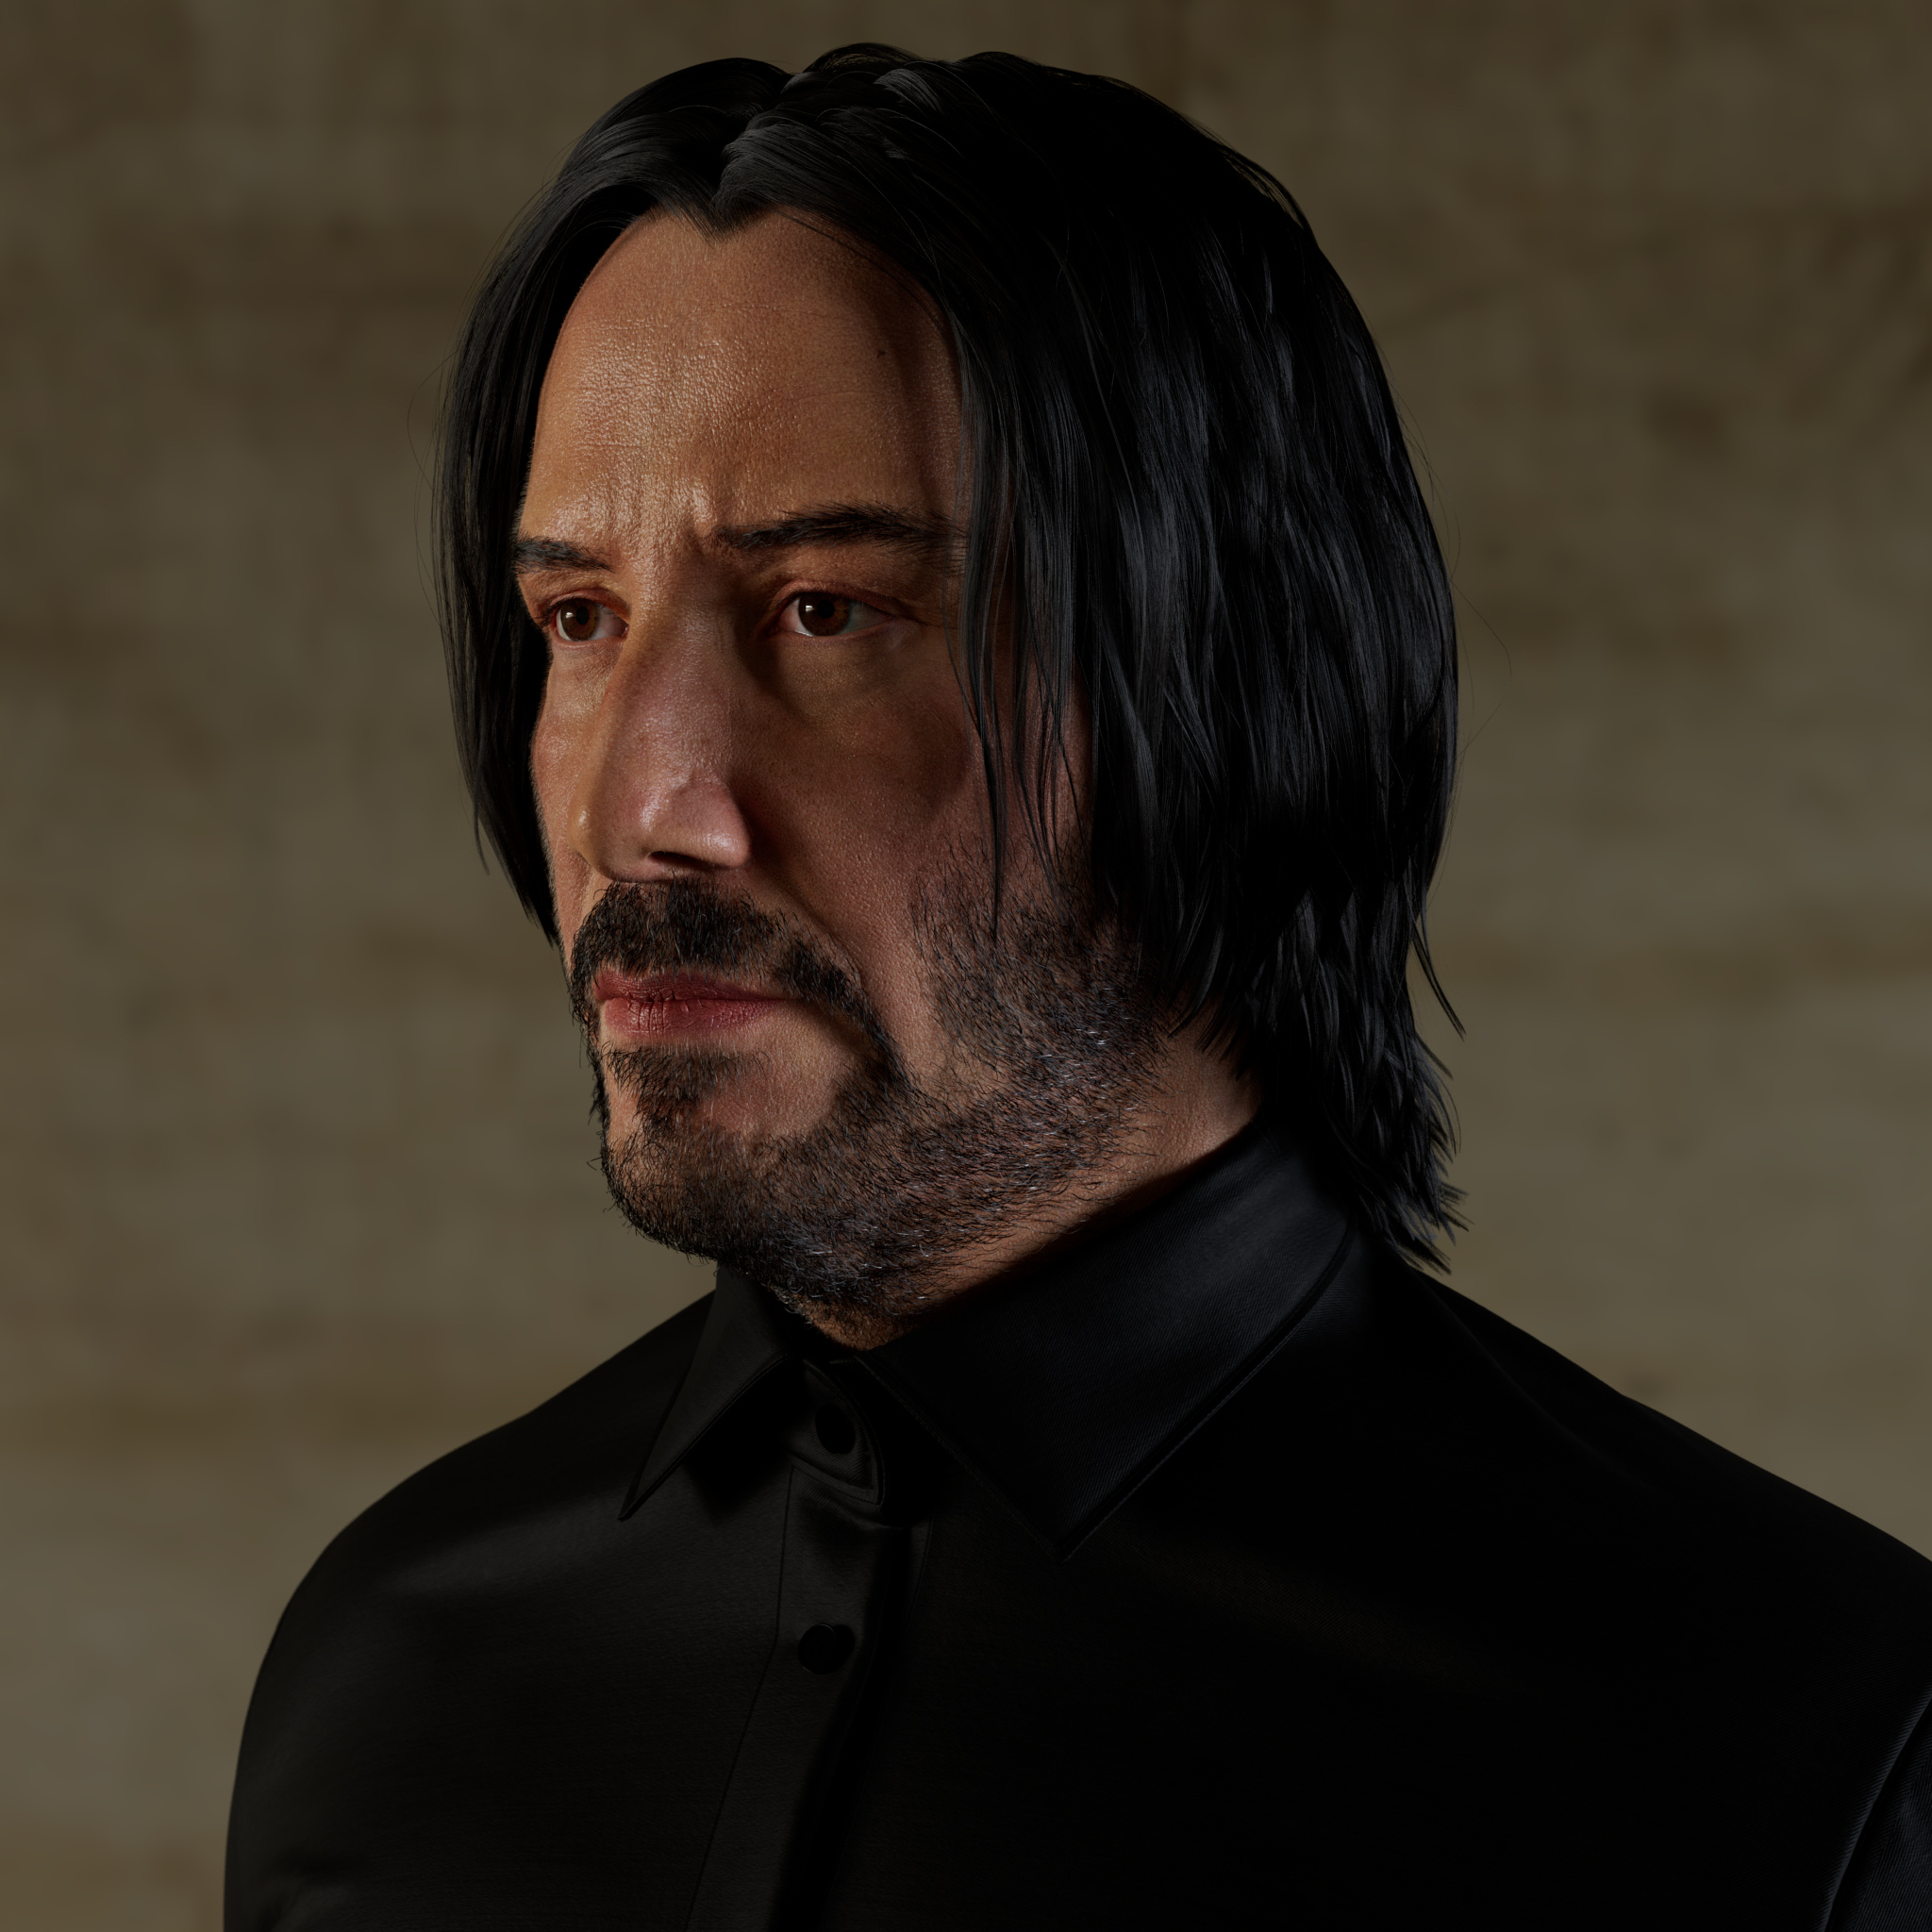 Keanu Reeves and Ian McShane Join Cast of John Wick Spinoff Ballerina